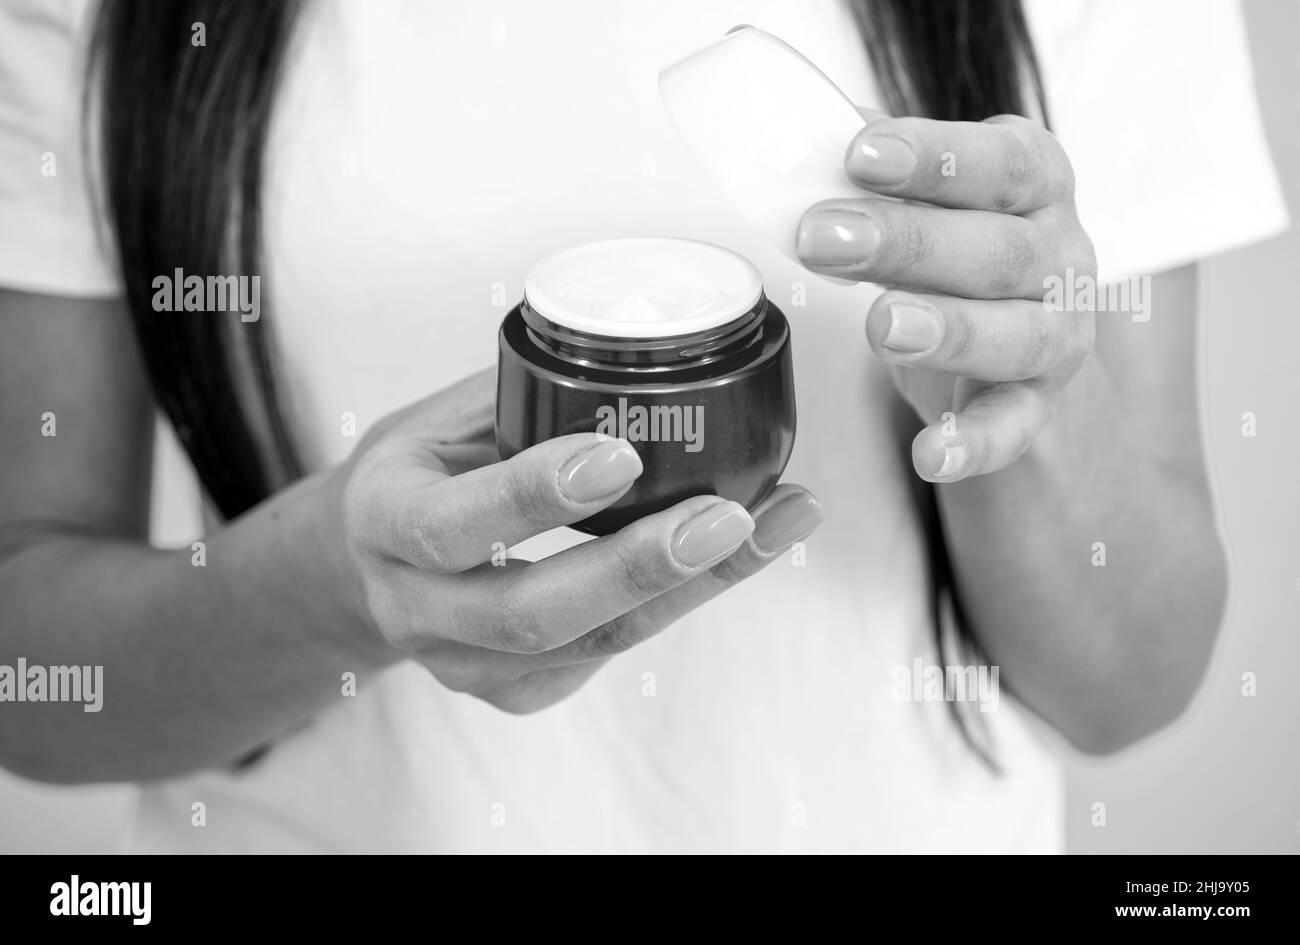 presenting cosmetic product for skin. open hand cream. hand manicure. female applying skin cream. Stock Photo